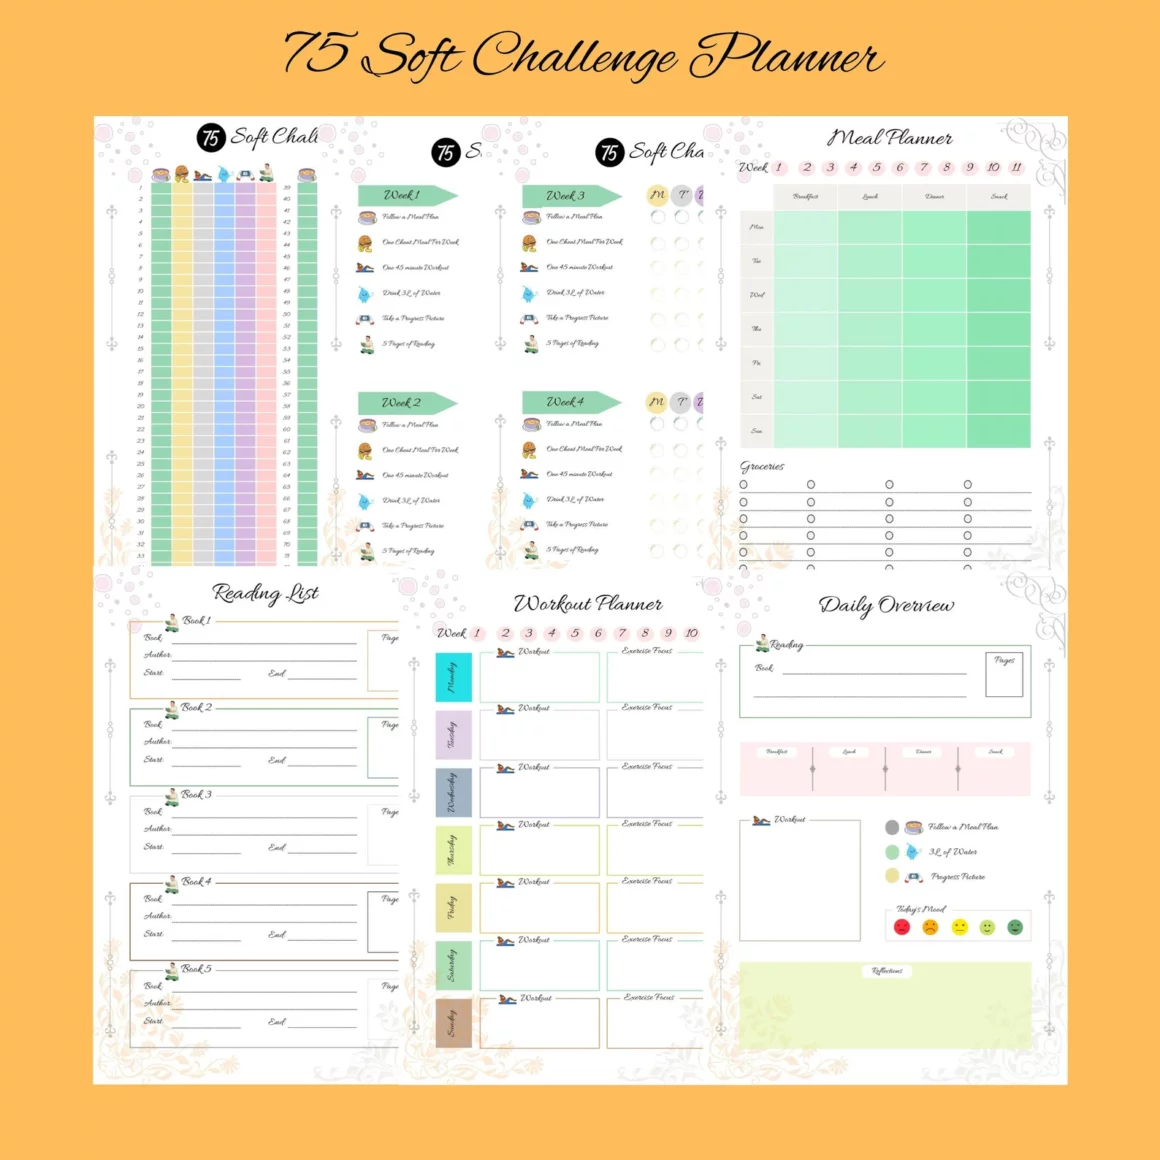 75 Soft Challenge Tips Guides 17 Soft Challenge Templates